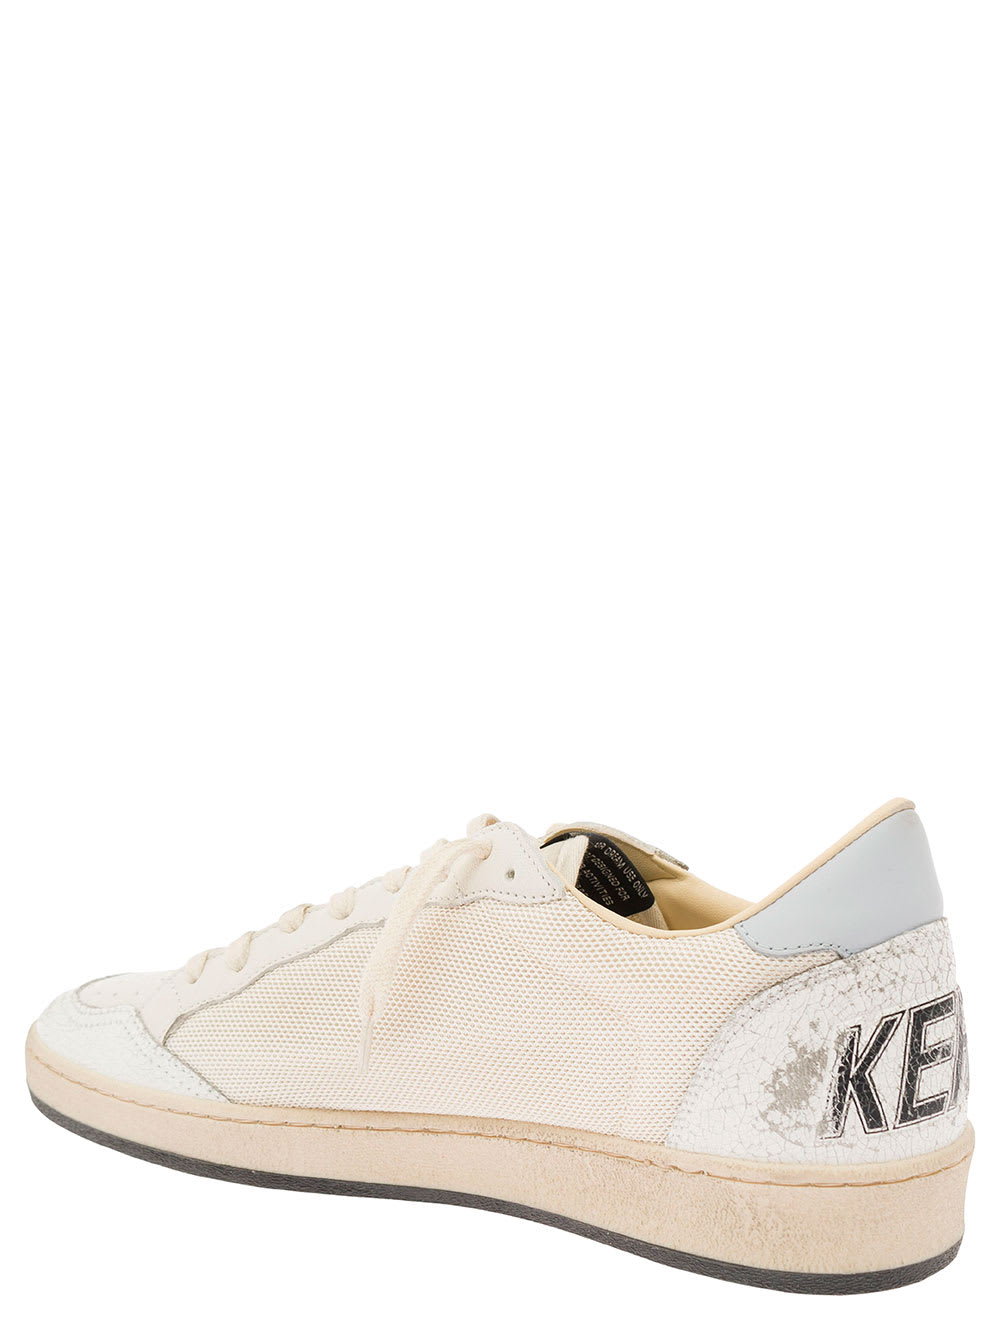 Shop Golden Goose Ball Star Net Upper Crack Leather Toe And Spur Nylon Tongue Leather Star And Heel In White